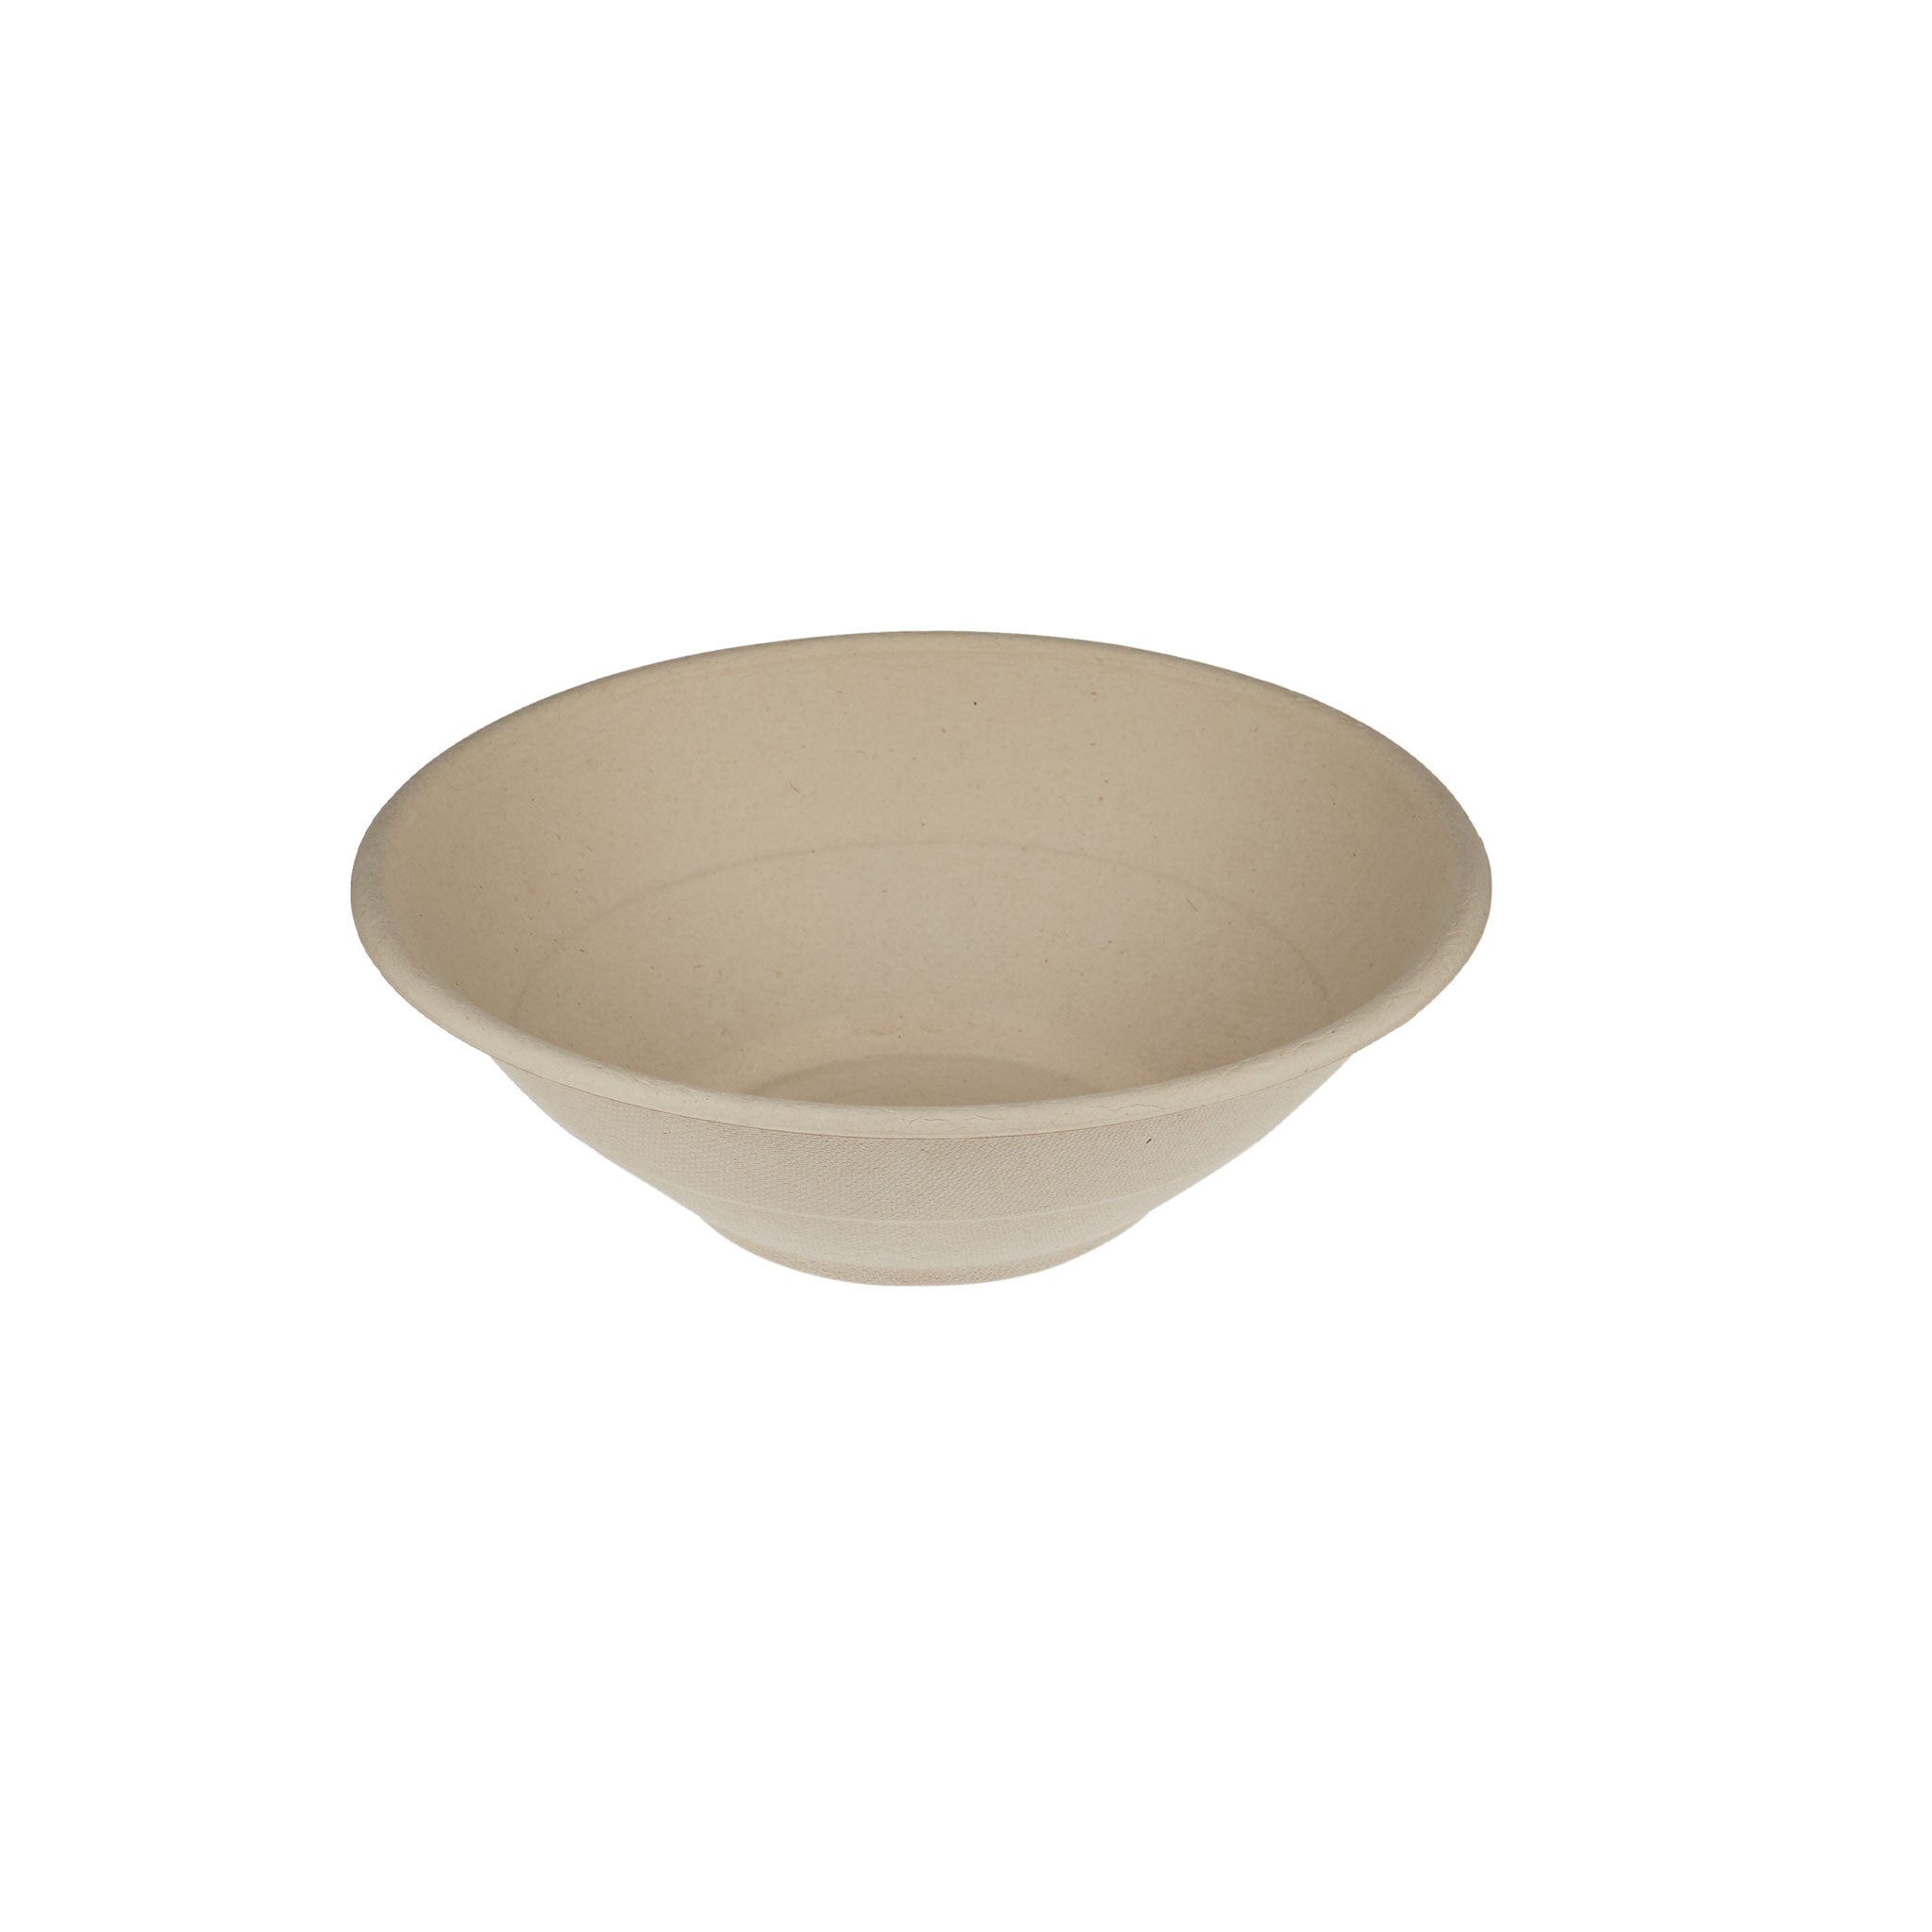 Bio Degradable Round Bowl With Lid